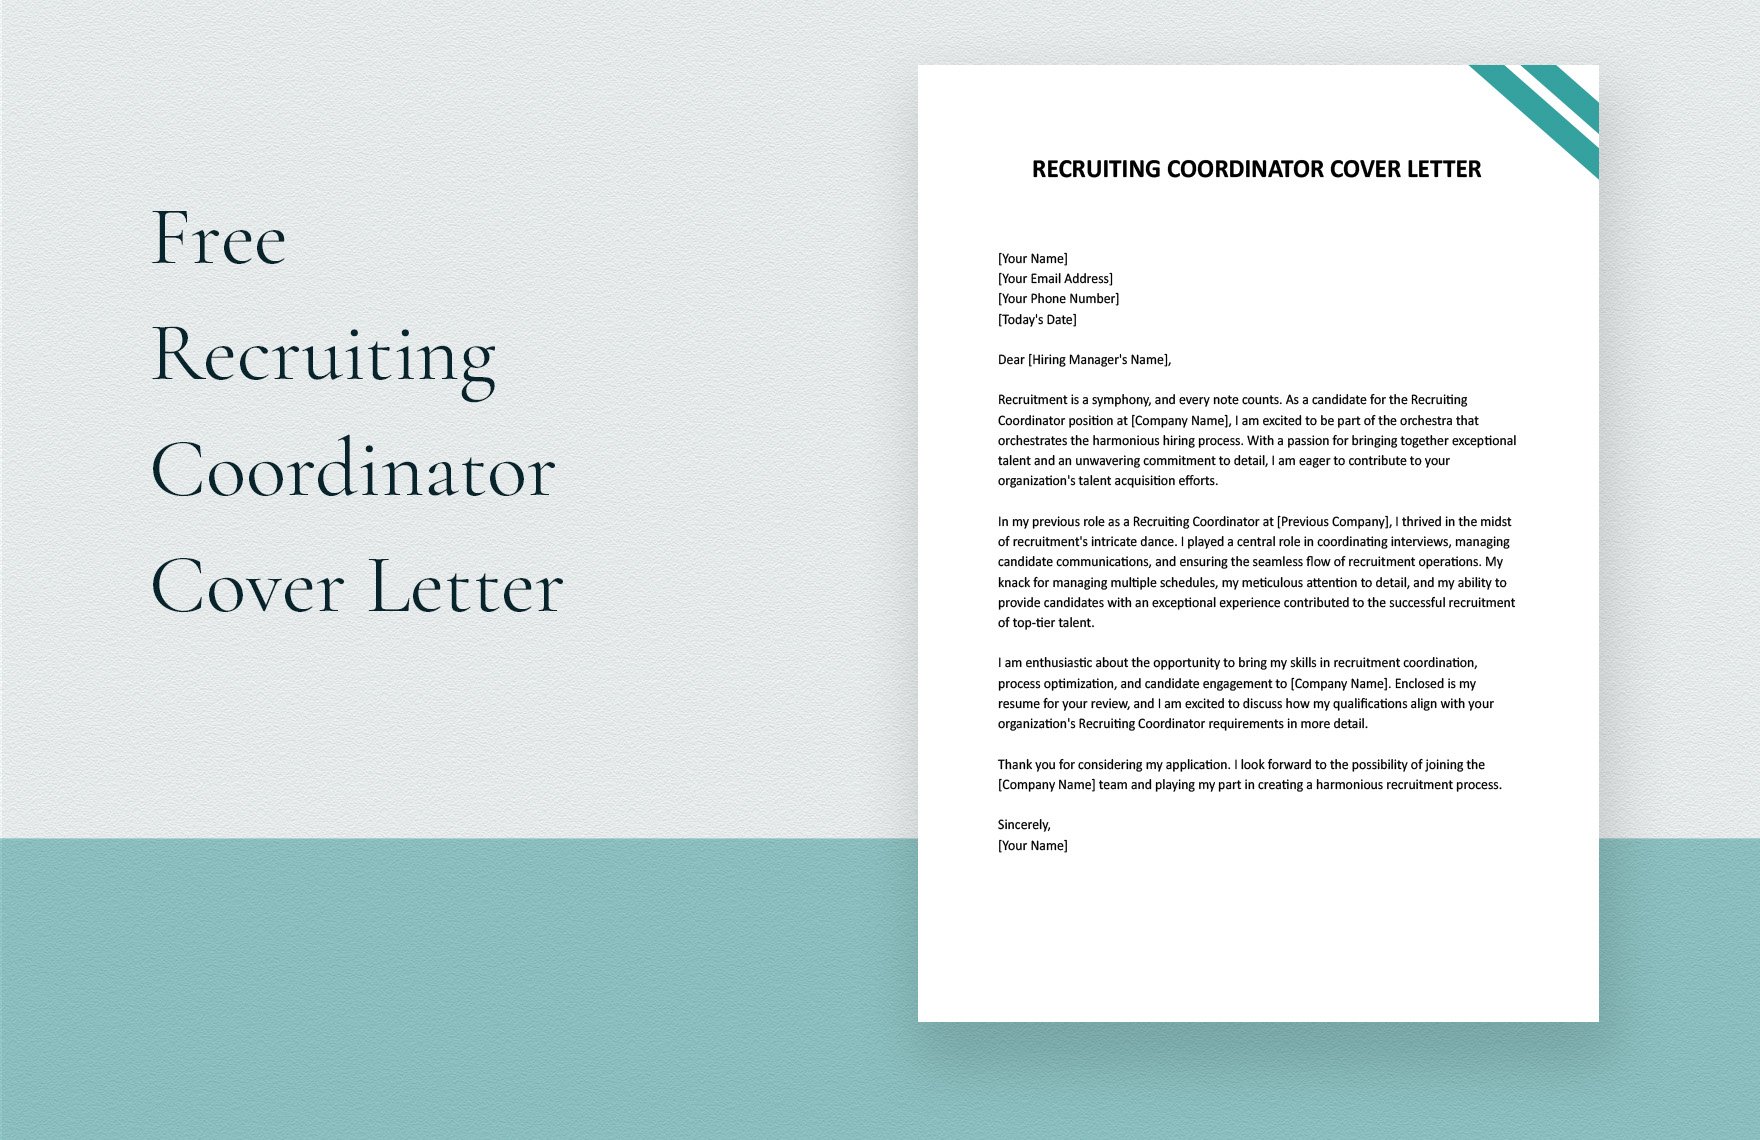 Recruiting Coordinator Cover Letter in Word, Google Docs